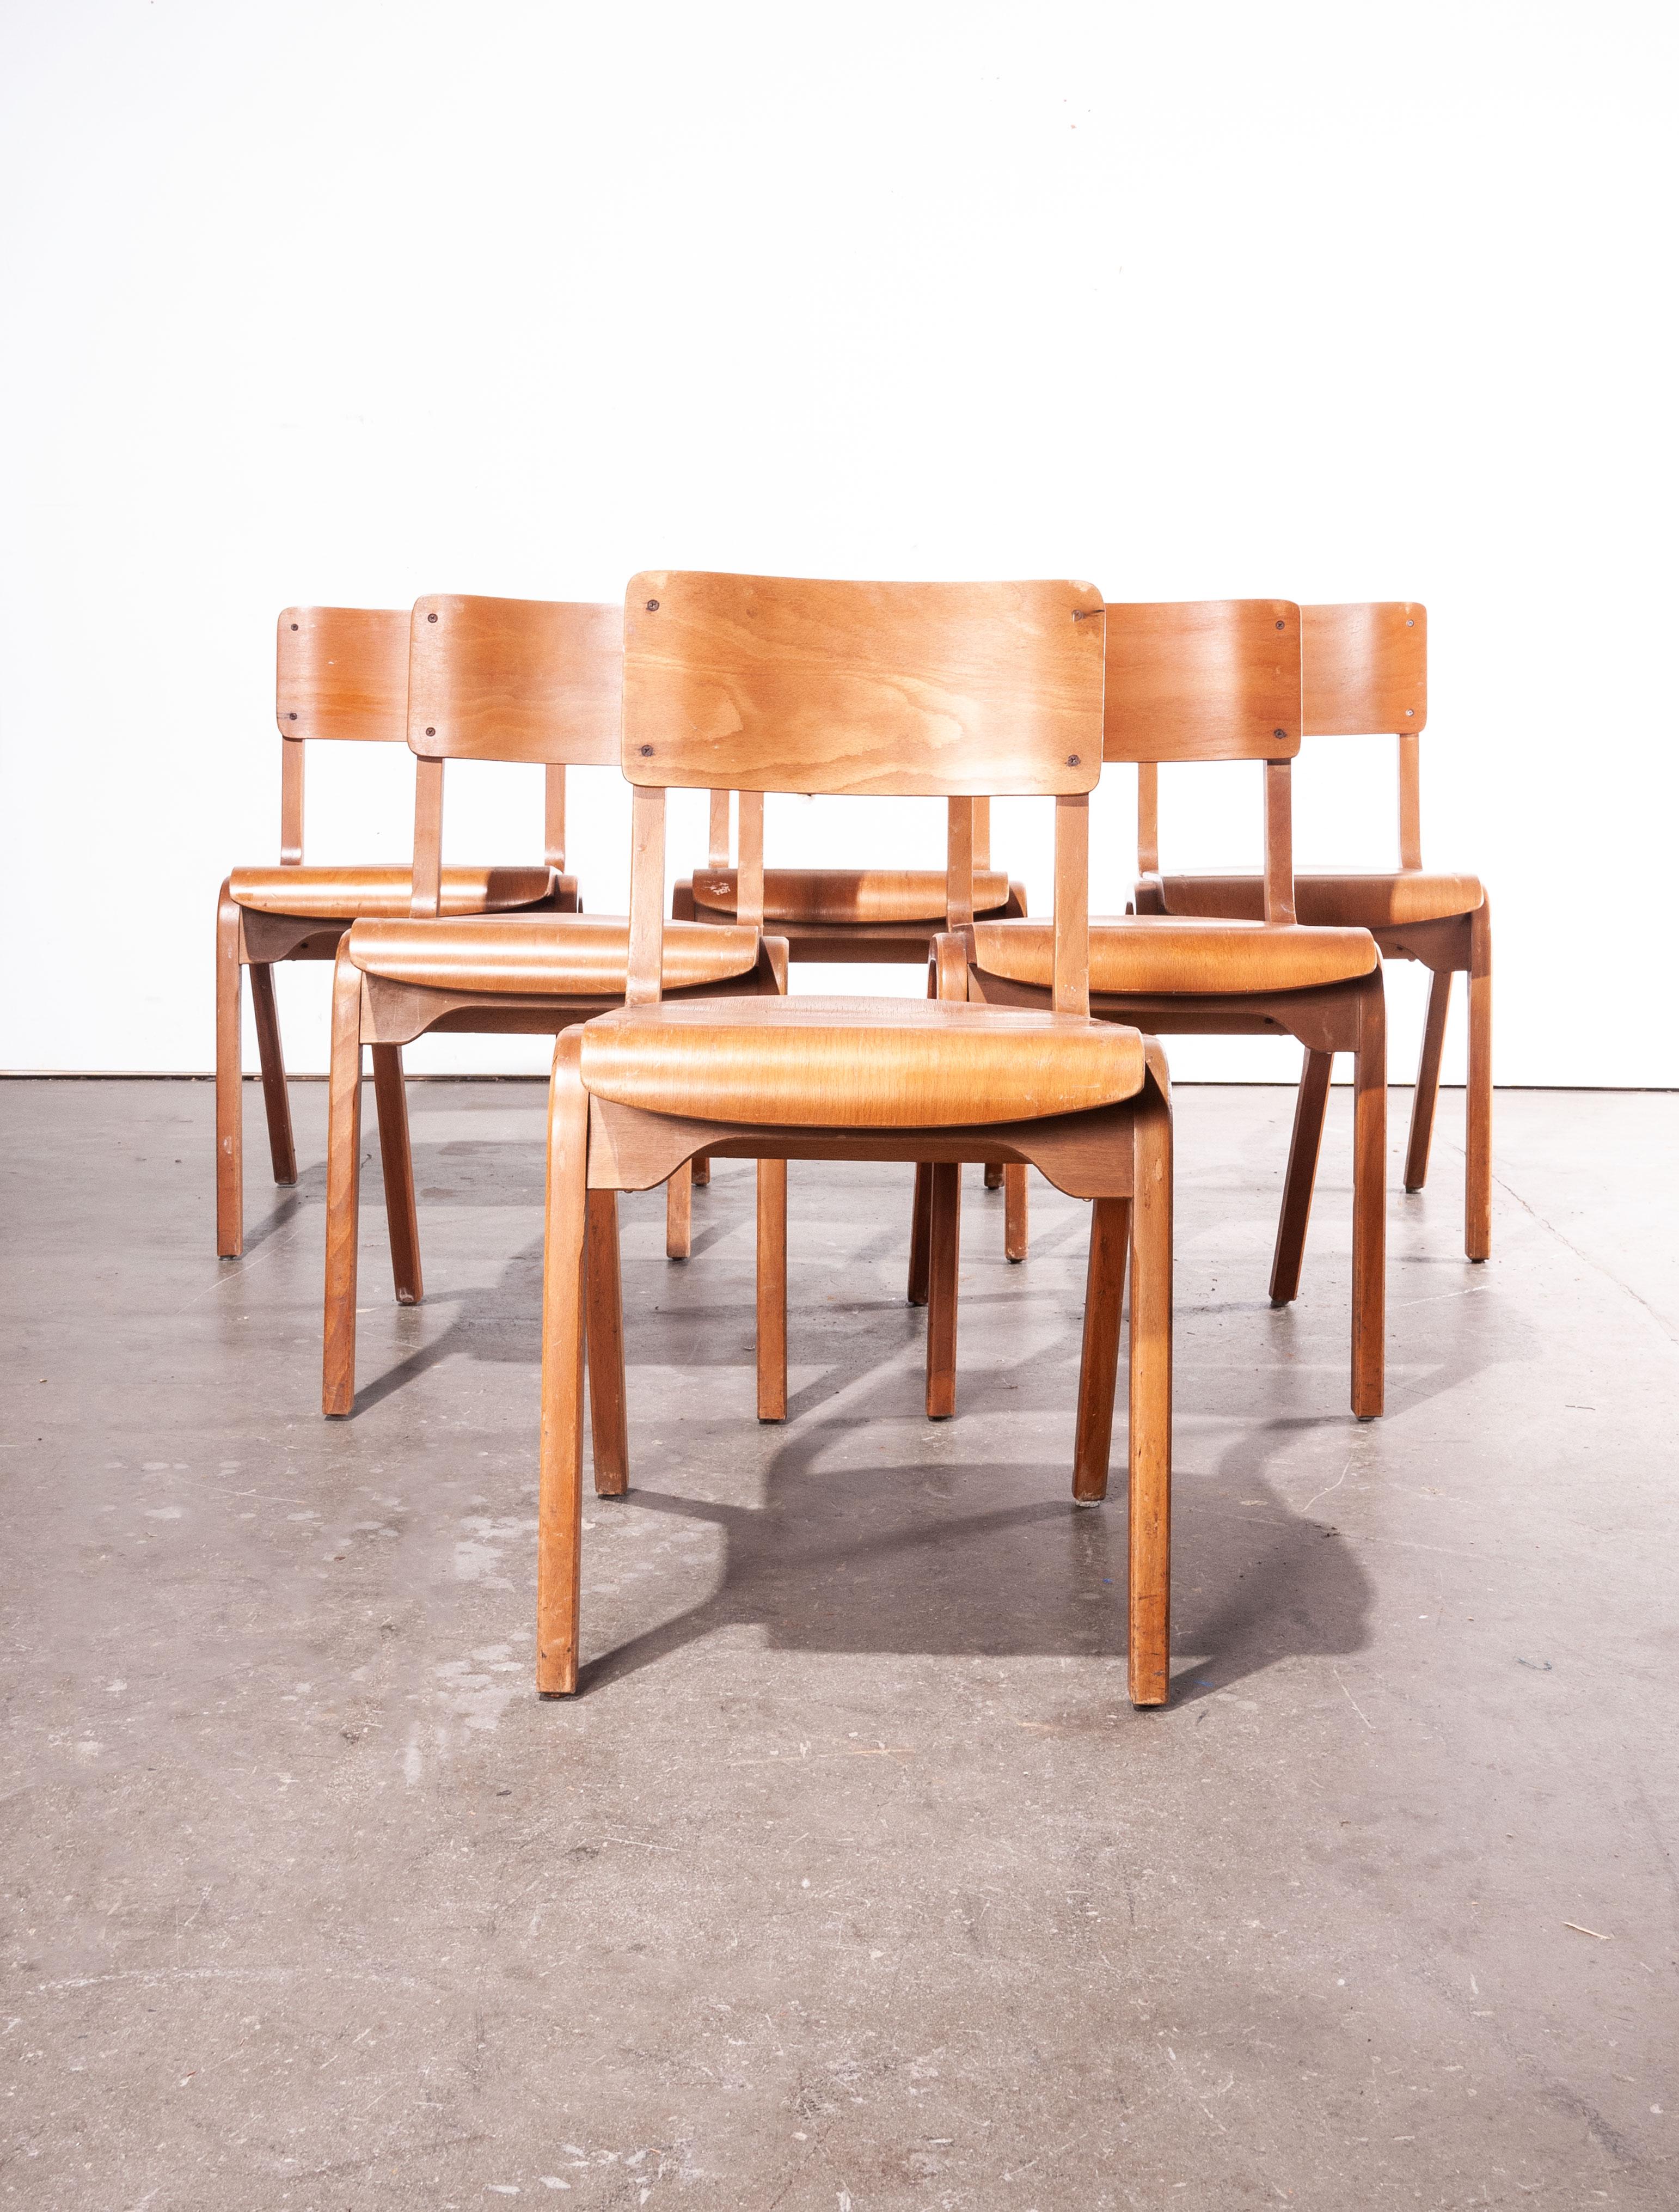 1950s stacking dining chairs by ESA James Leonard – Lamstak – Set of six – Other quantities available

Set of six 1950s rare vintage James Leonard ESA Esavian stacking dining chairs. This is one of our favourite model of chairs. Designed by James